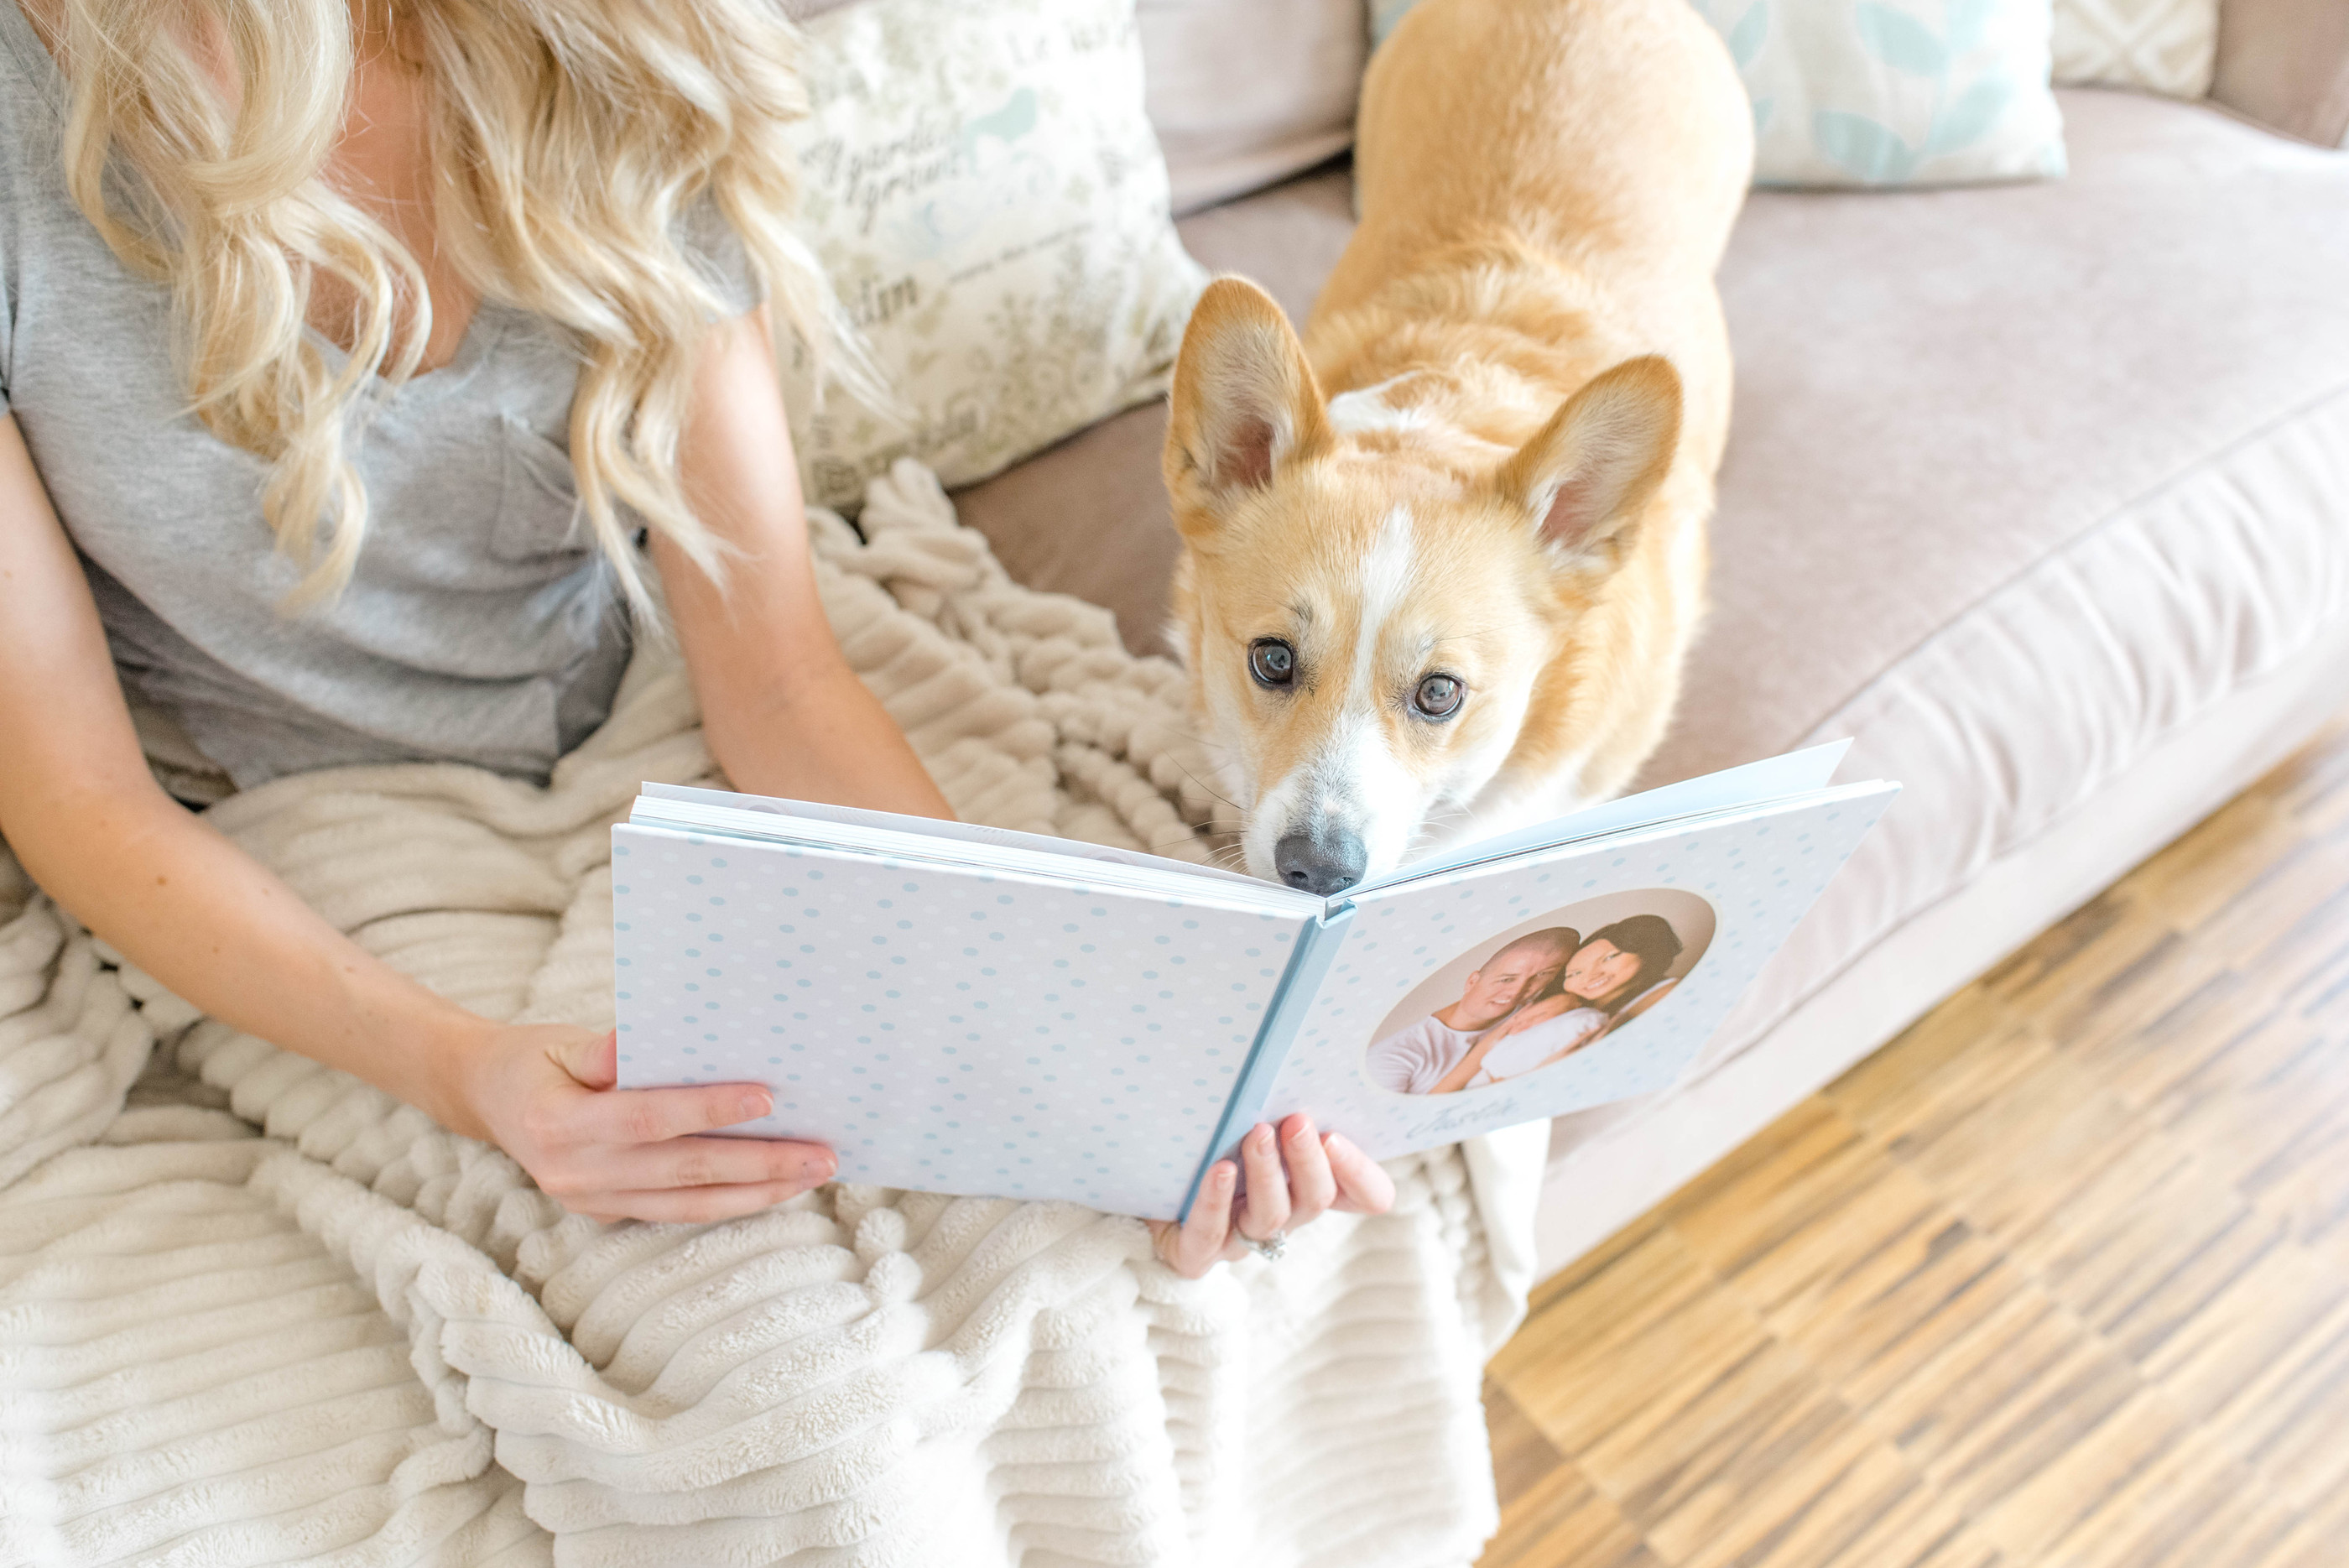 women on sofa viewing a hardcover photo album with dog